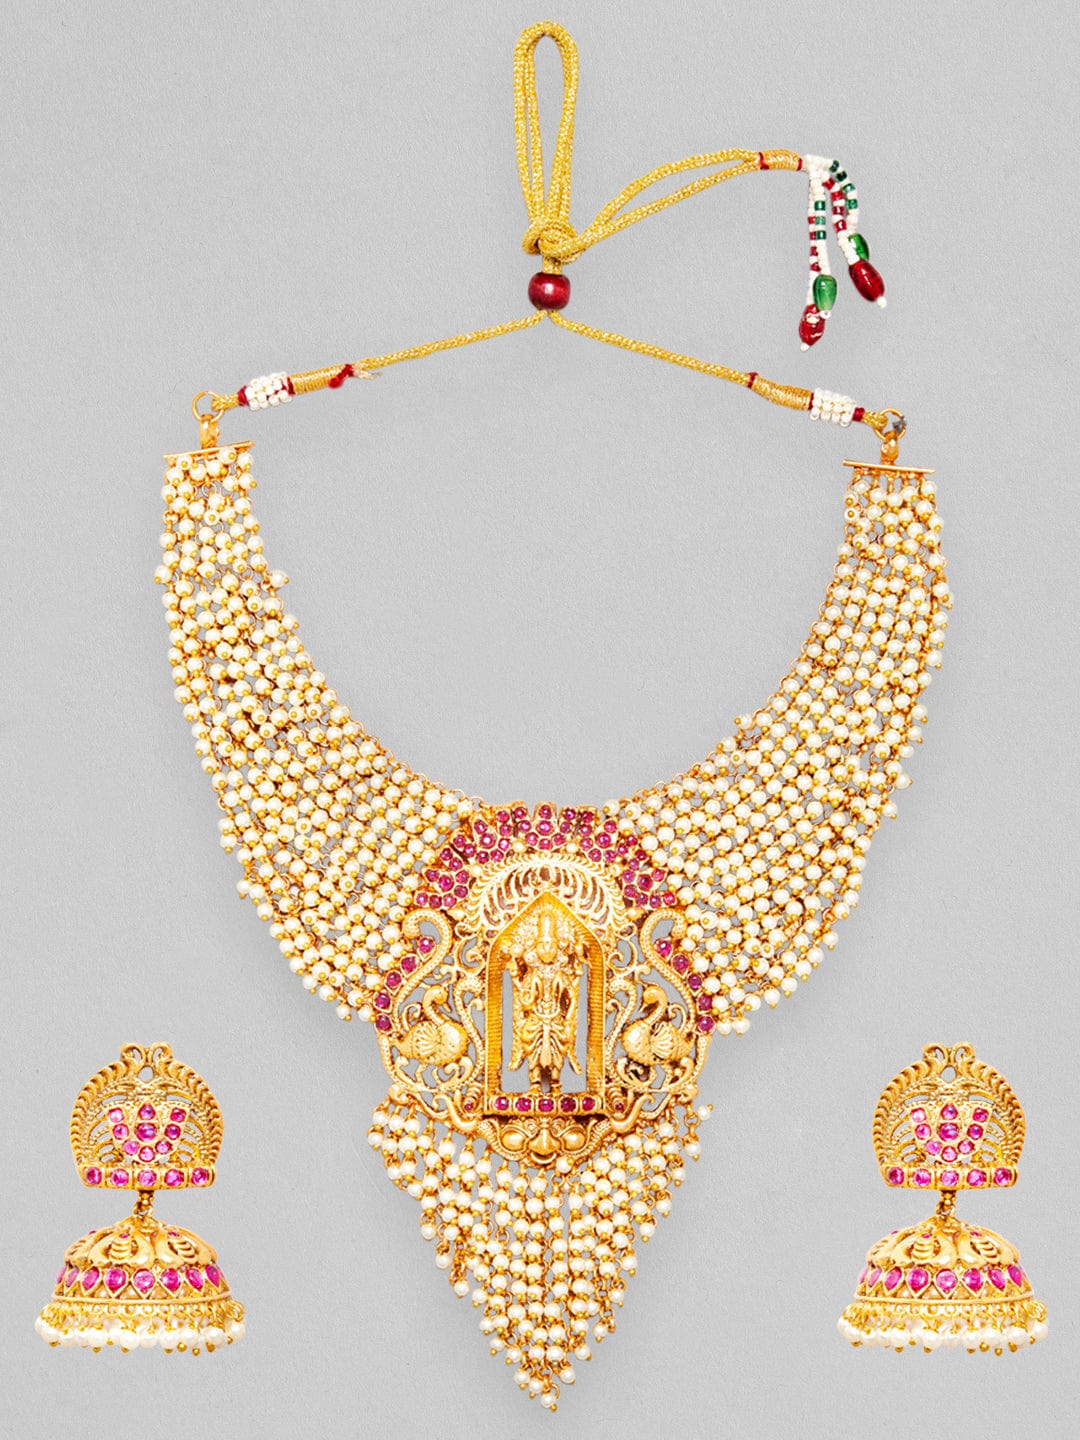 Rubans 24K Gold Plated Necklace Set With Pearls Ruby Stones And Goddess Motifs. Necklace Set